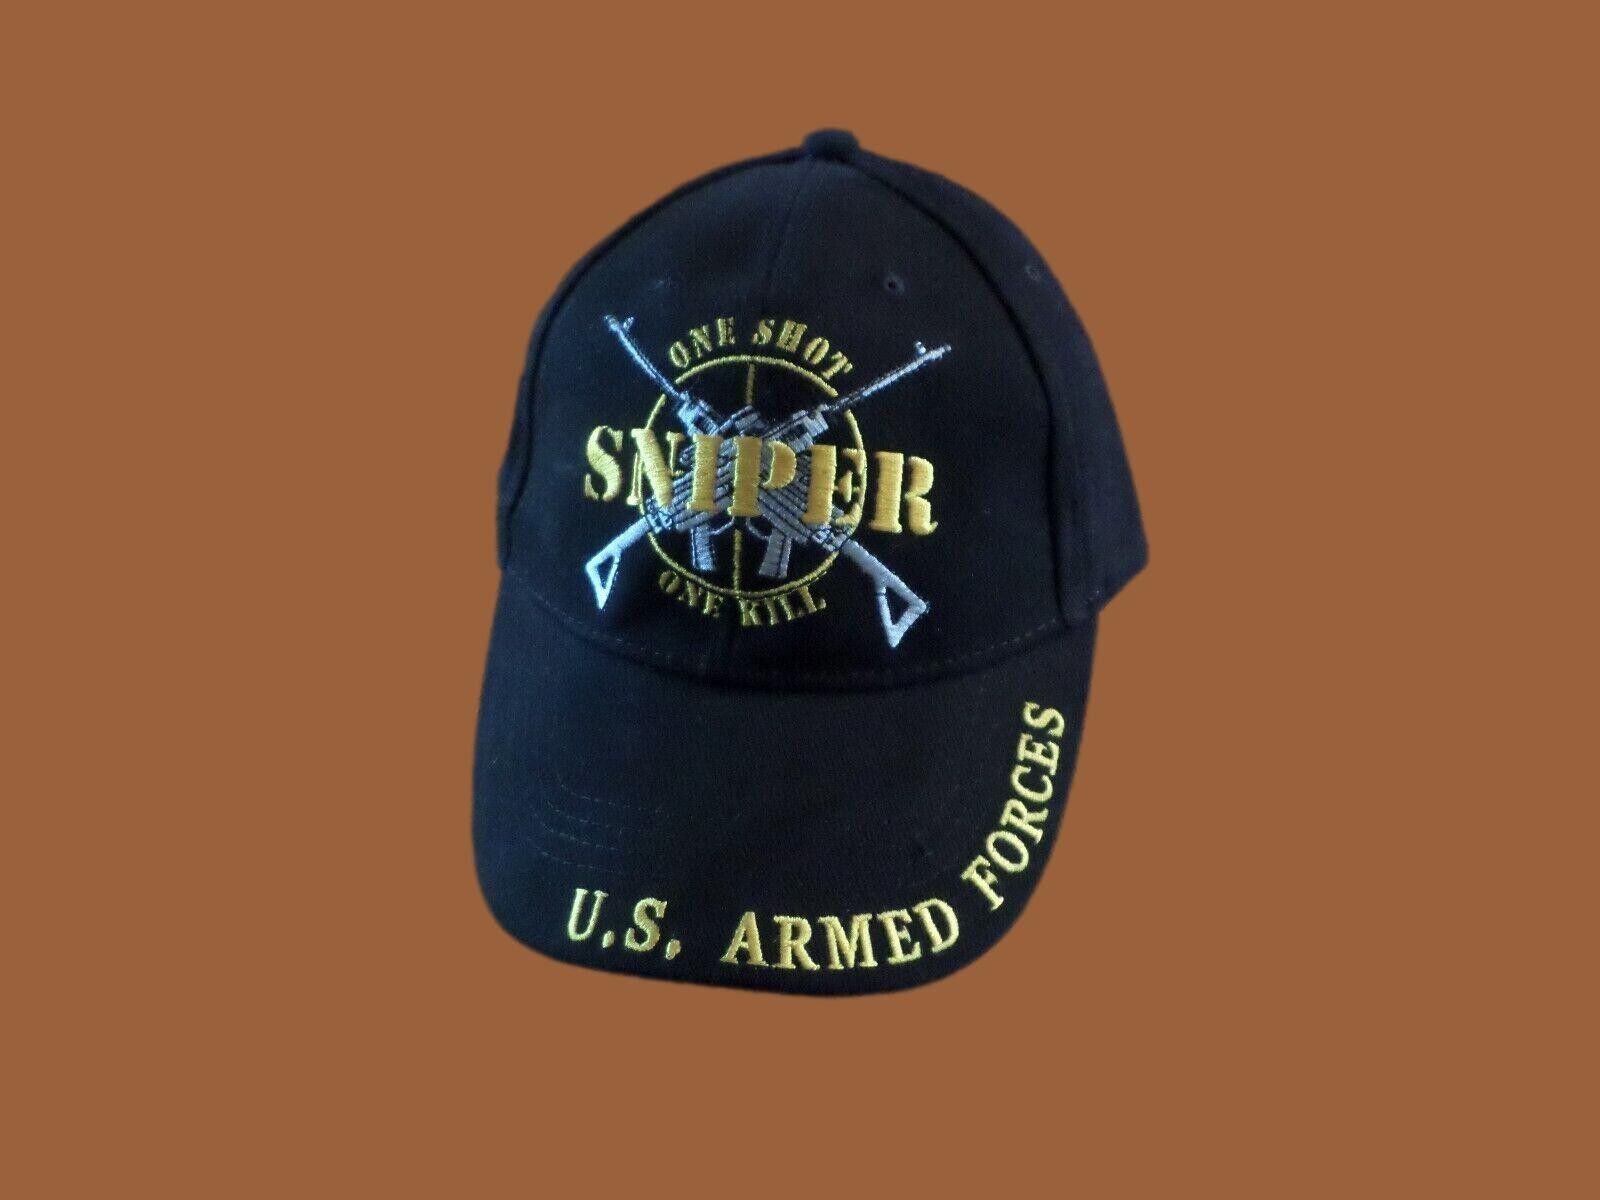 U.S MILITARY SNIPER HAT ONE SHOT ONE KILL EMBROIDERED U.S ARMED FORCES CAP